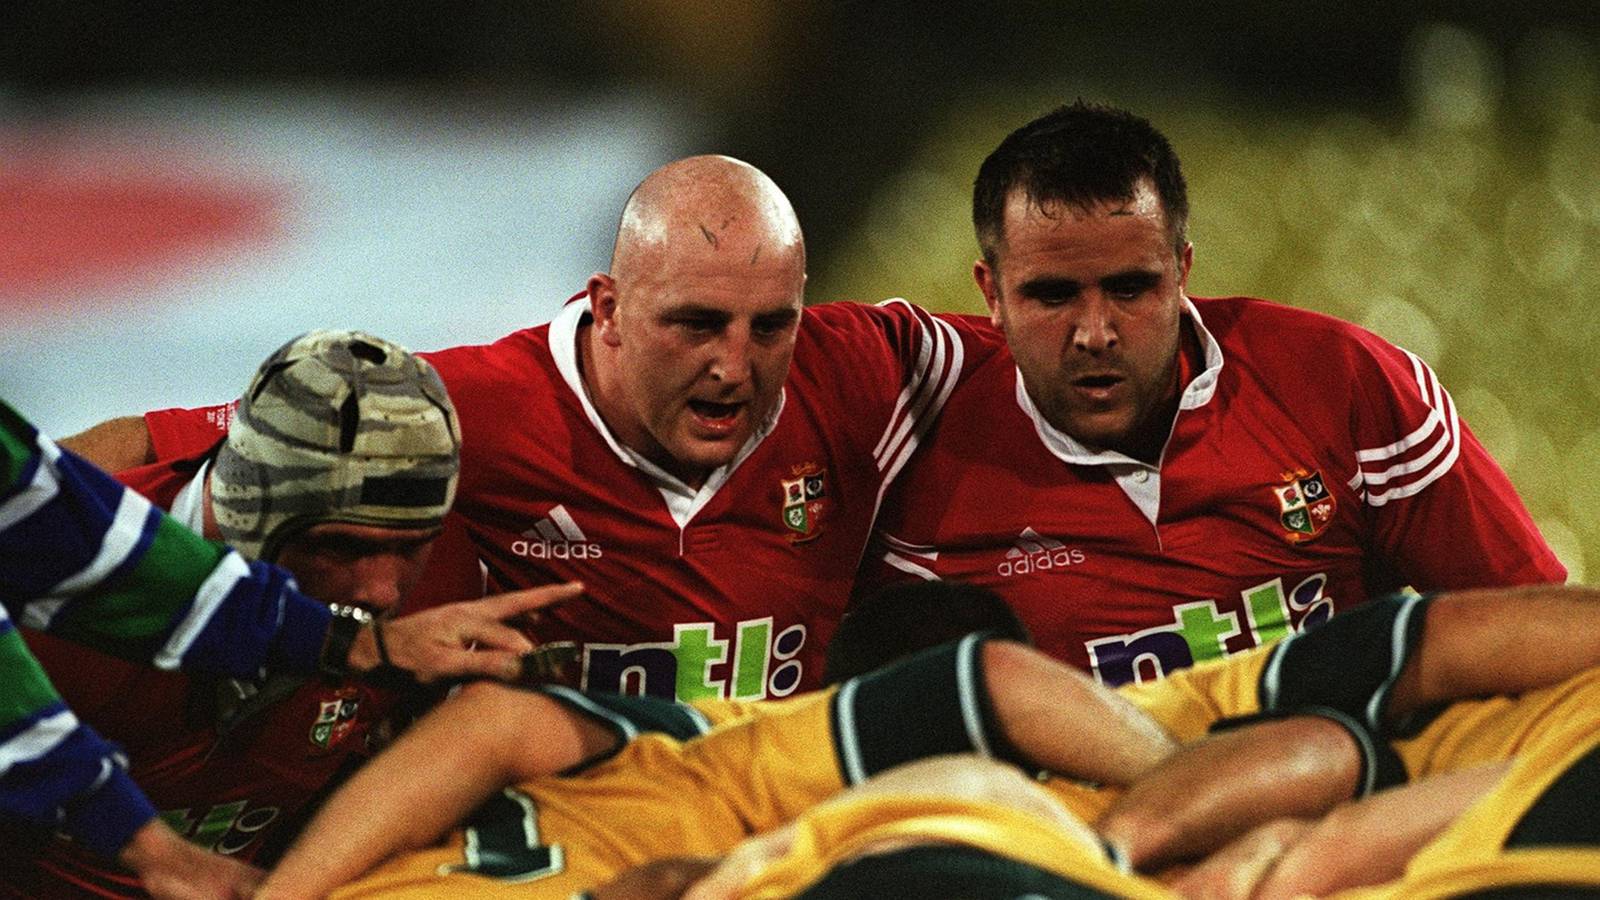 enclose mount Herbs Former Lions and Scotland prop Tom Smith has cancer – The Irish Times